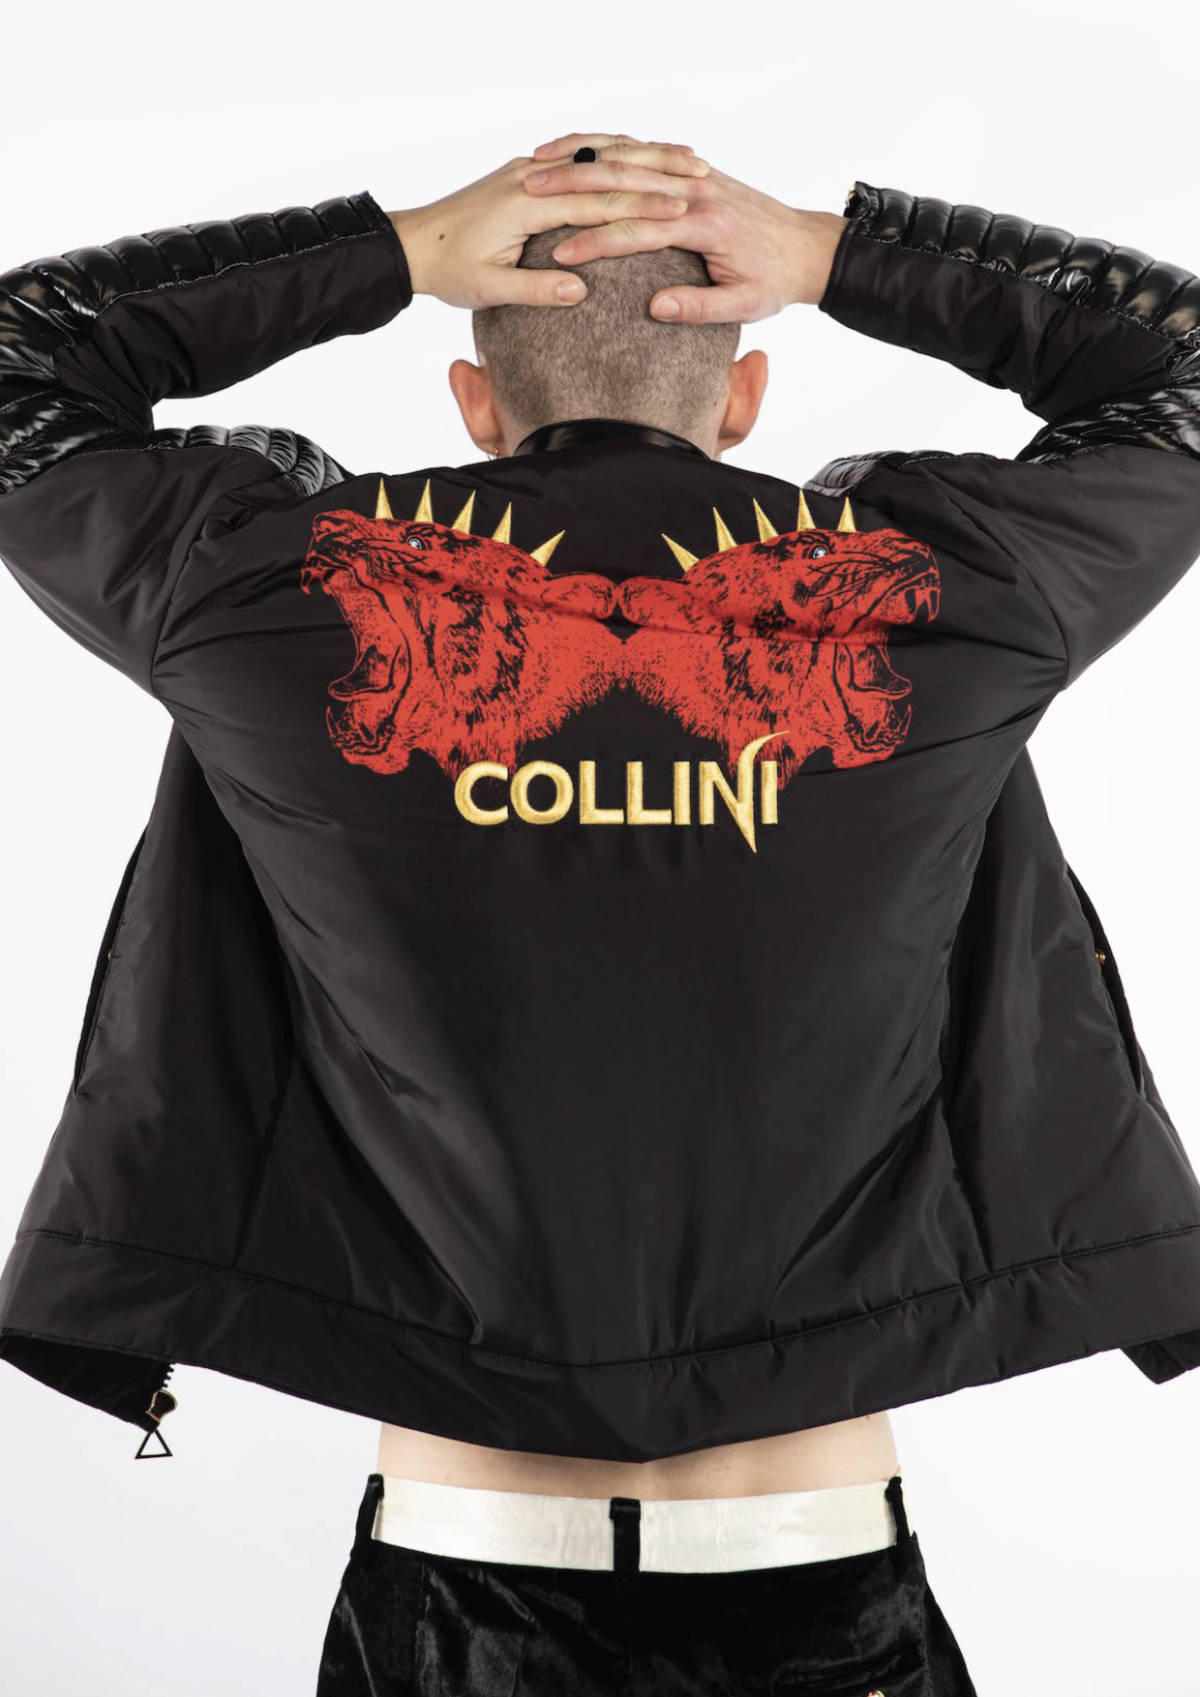 Collini Presents Its Fall Winter 21/22 Collection: Men's Library